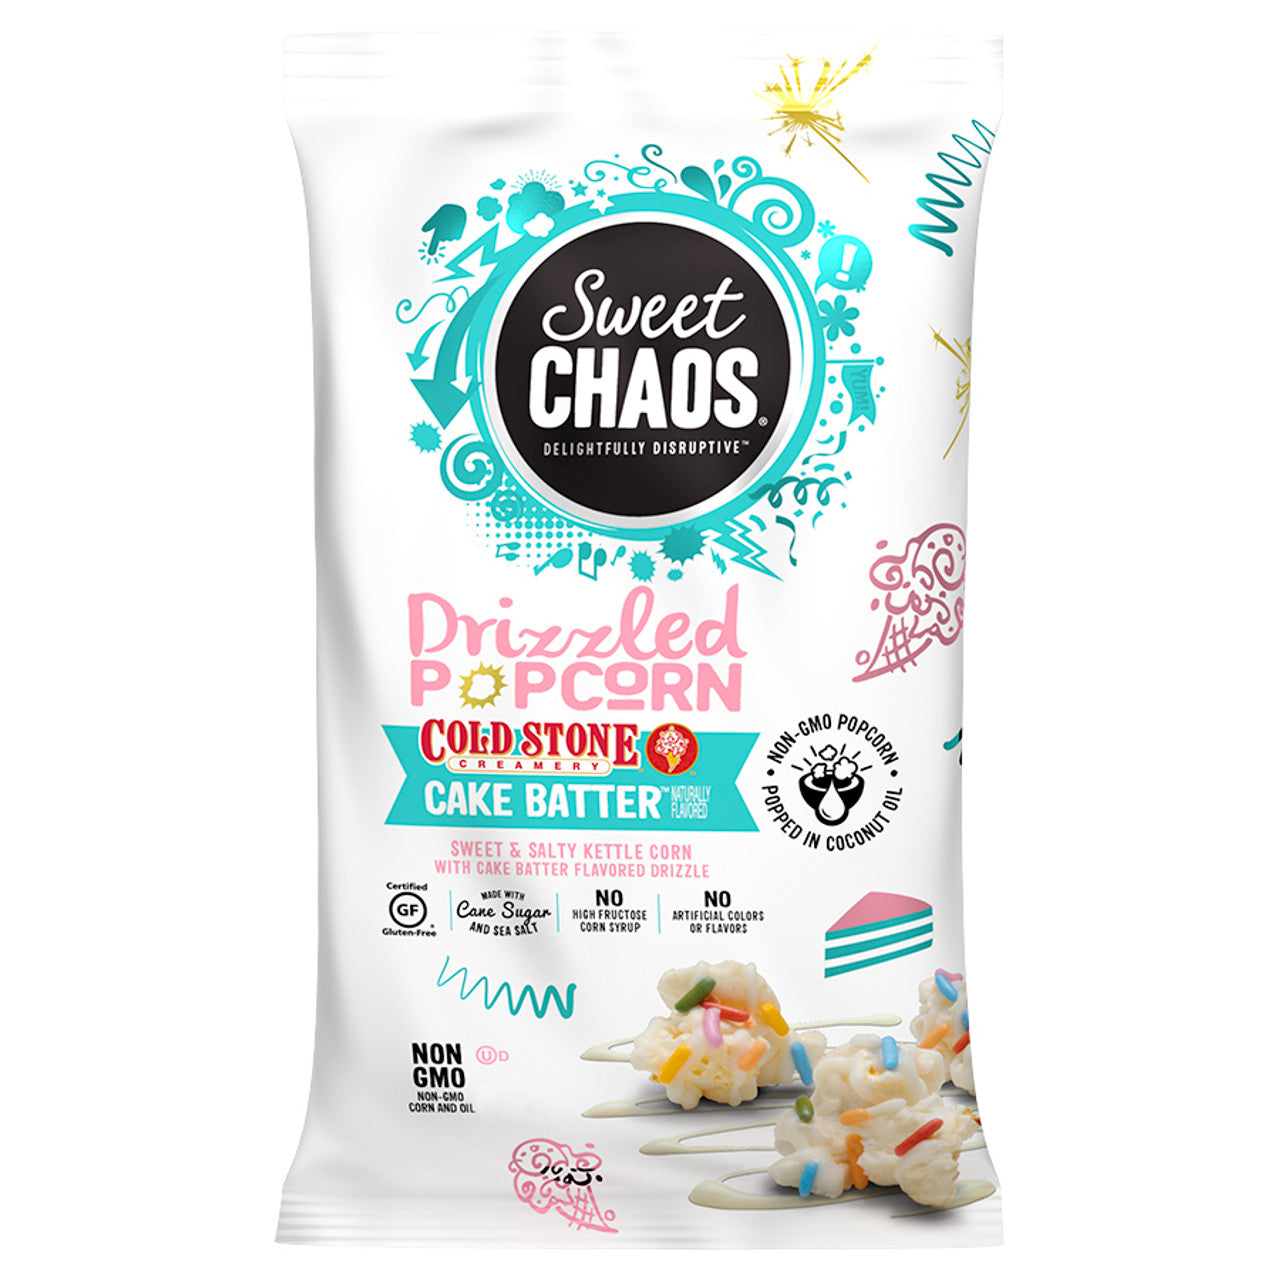 Sweet Chaos Drizzled Popcorn - Cold Stone Cake Batter